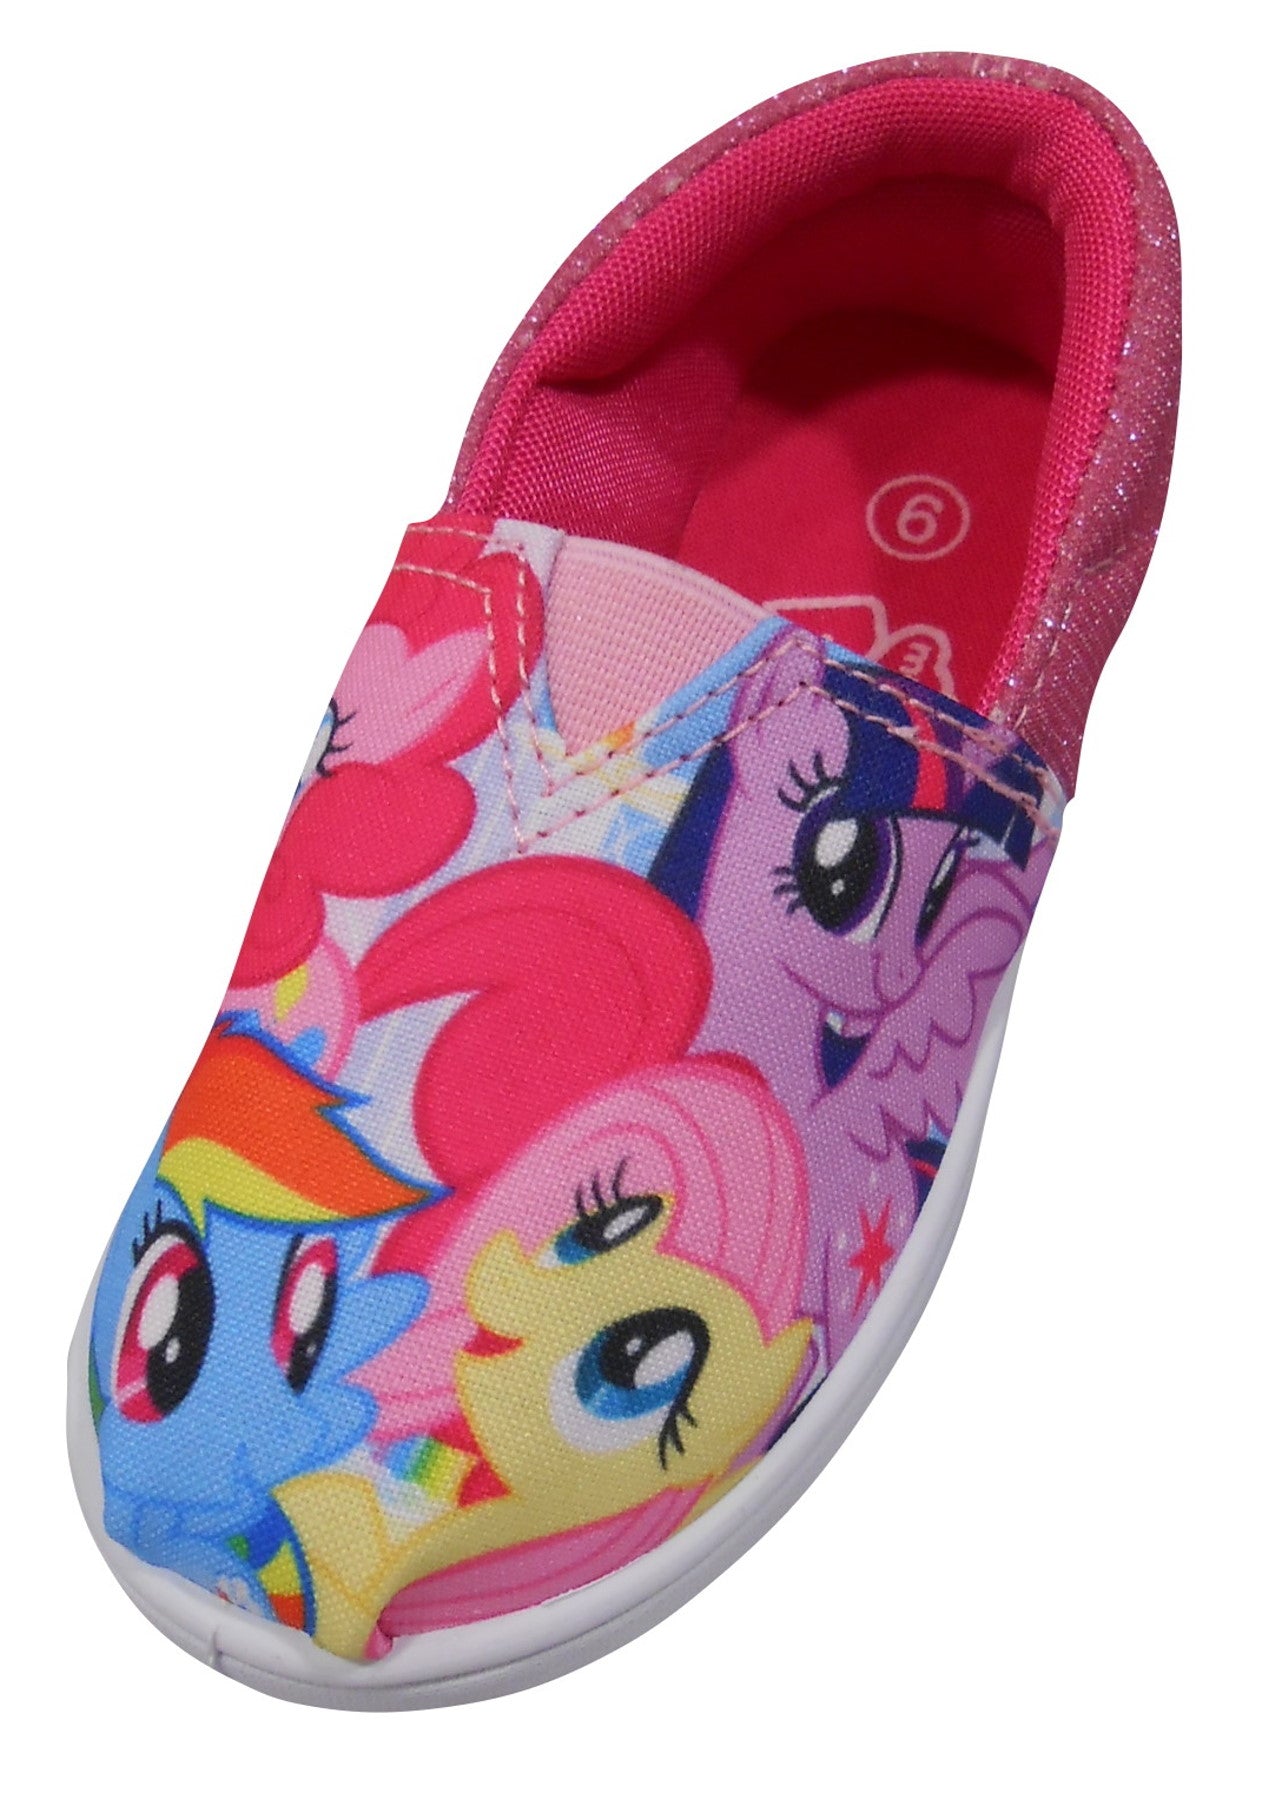 My Little Pony Girl's Slip on Canvas Shoes Ideal for summer months